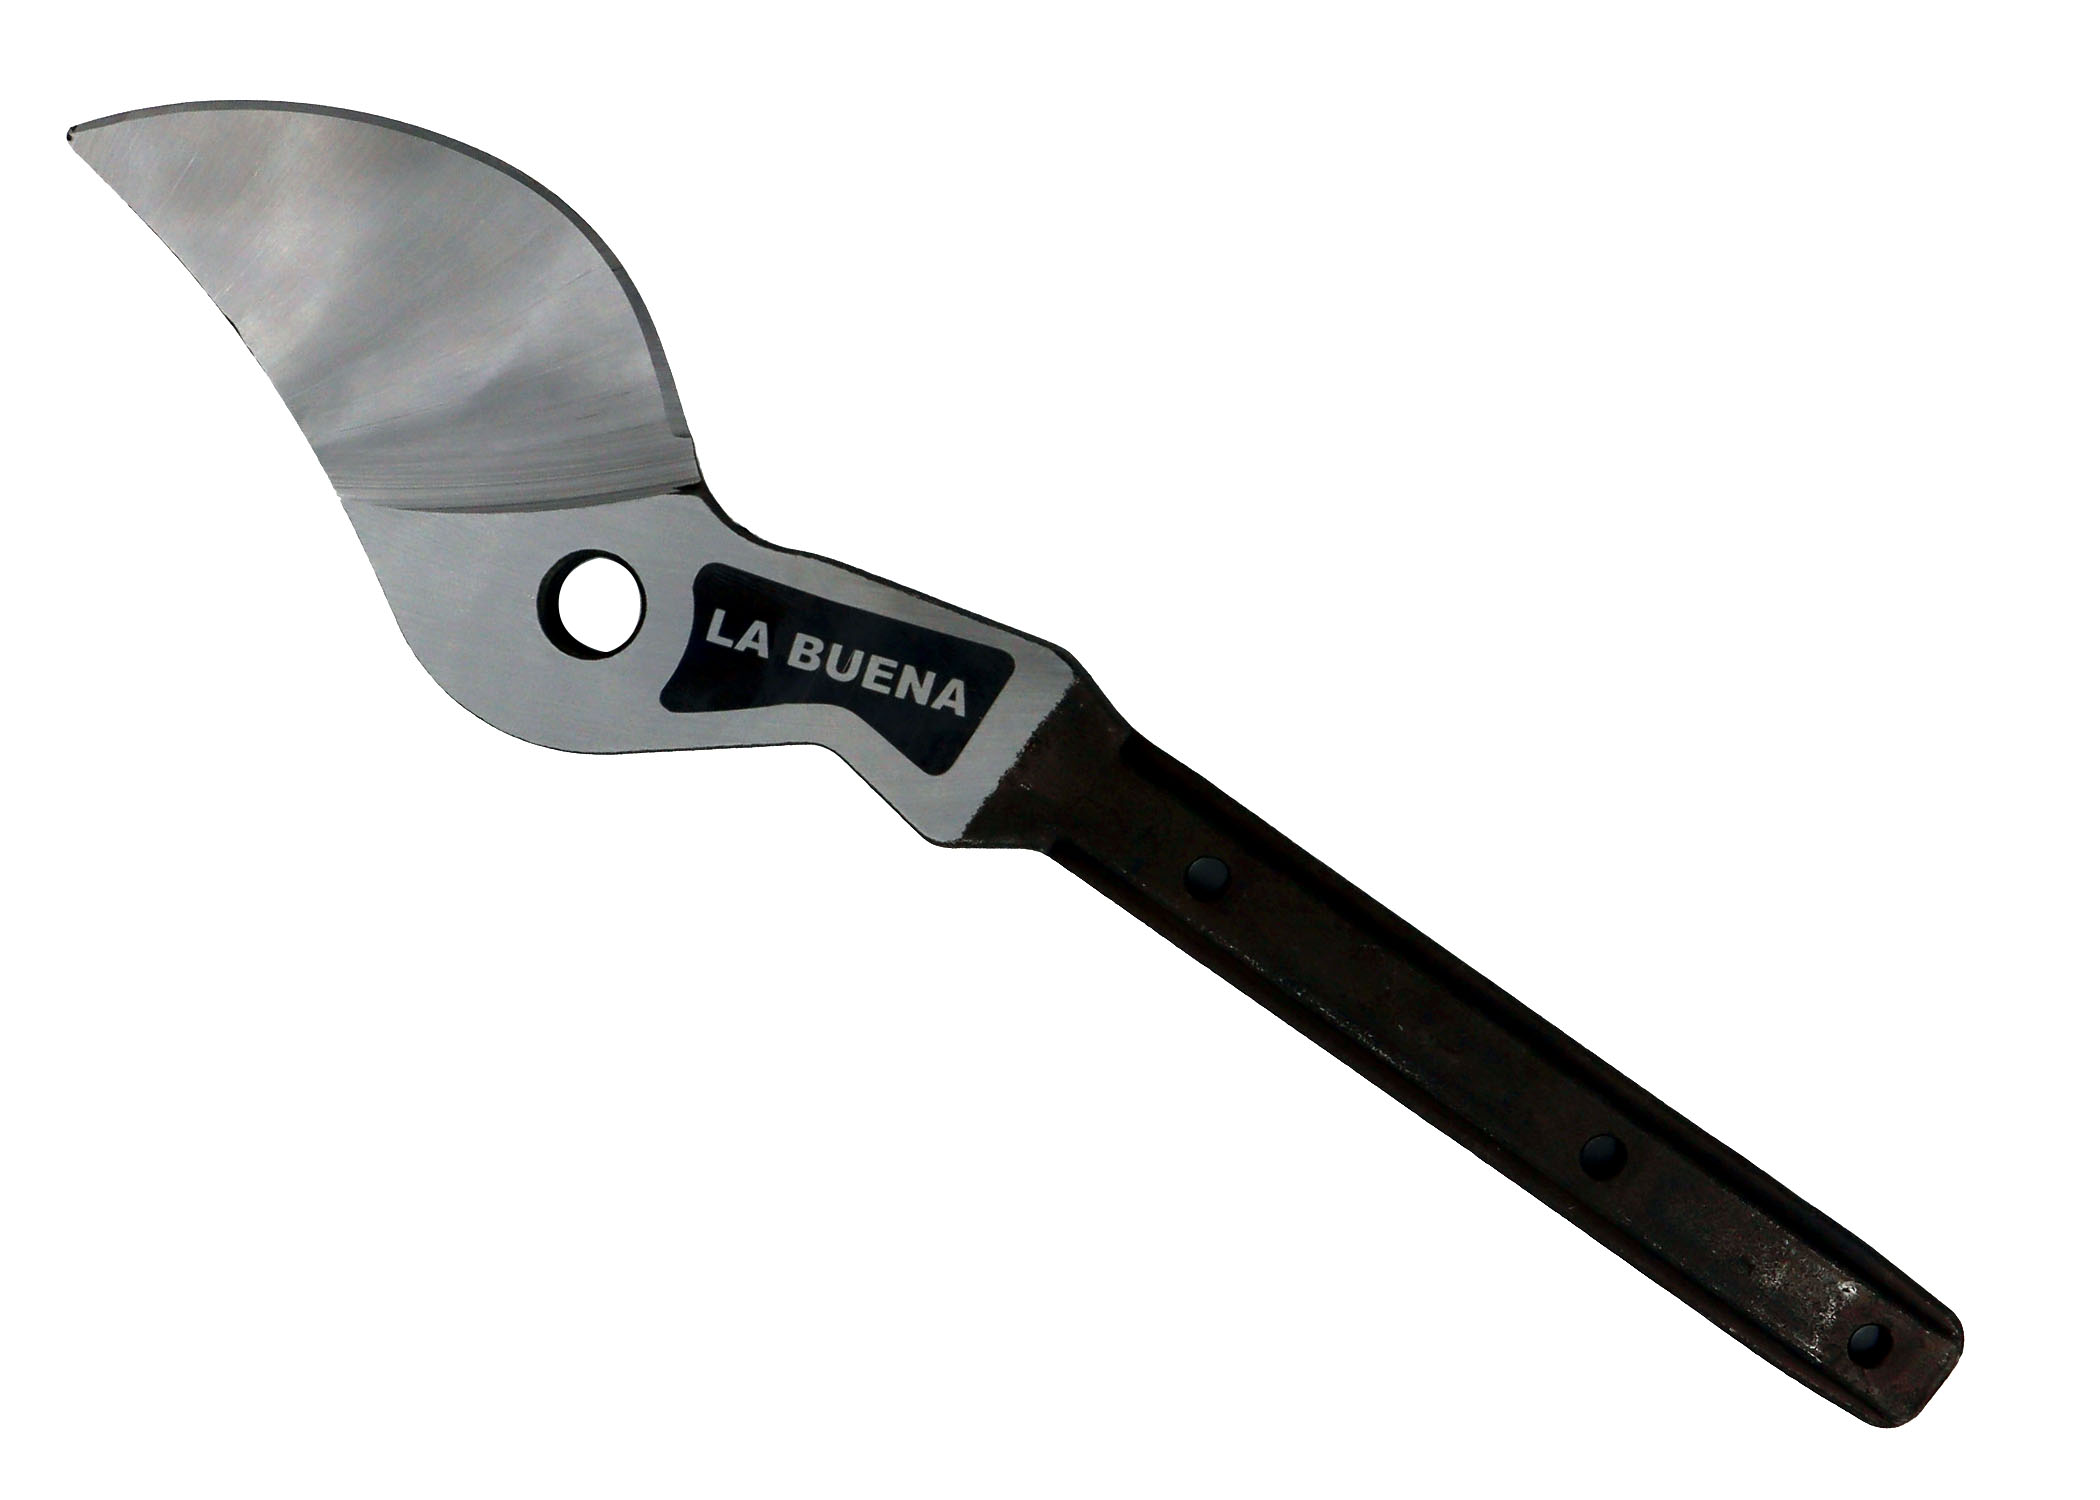 La Buena Lopper Blade MB-416 Hickok Lopper Replacement Lopper Forged Cutting Blade